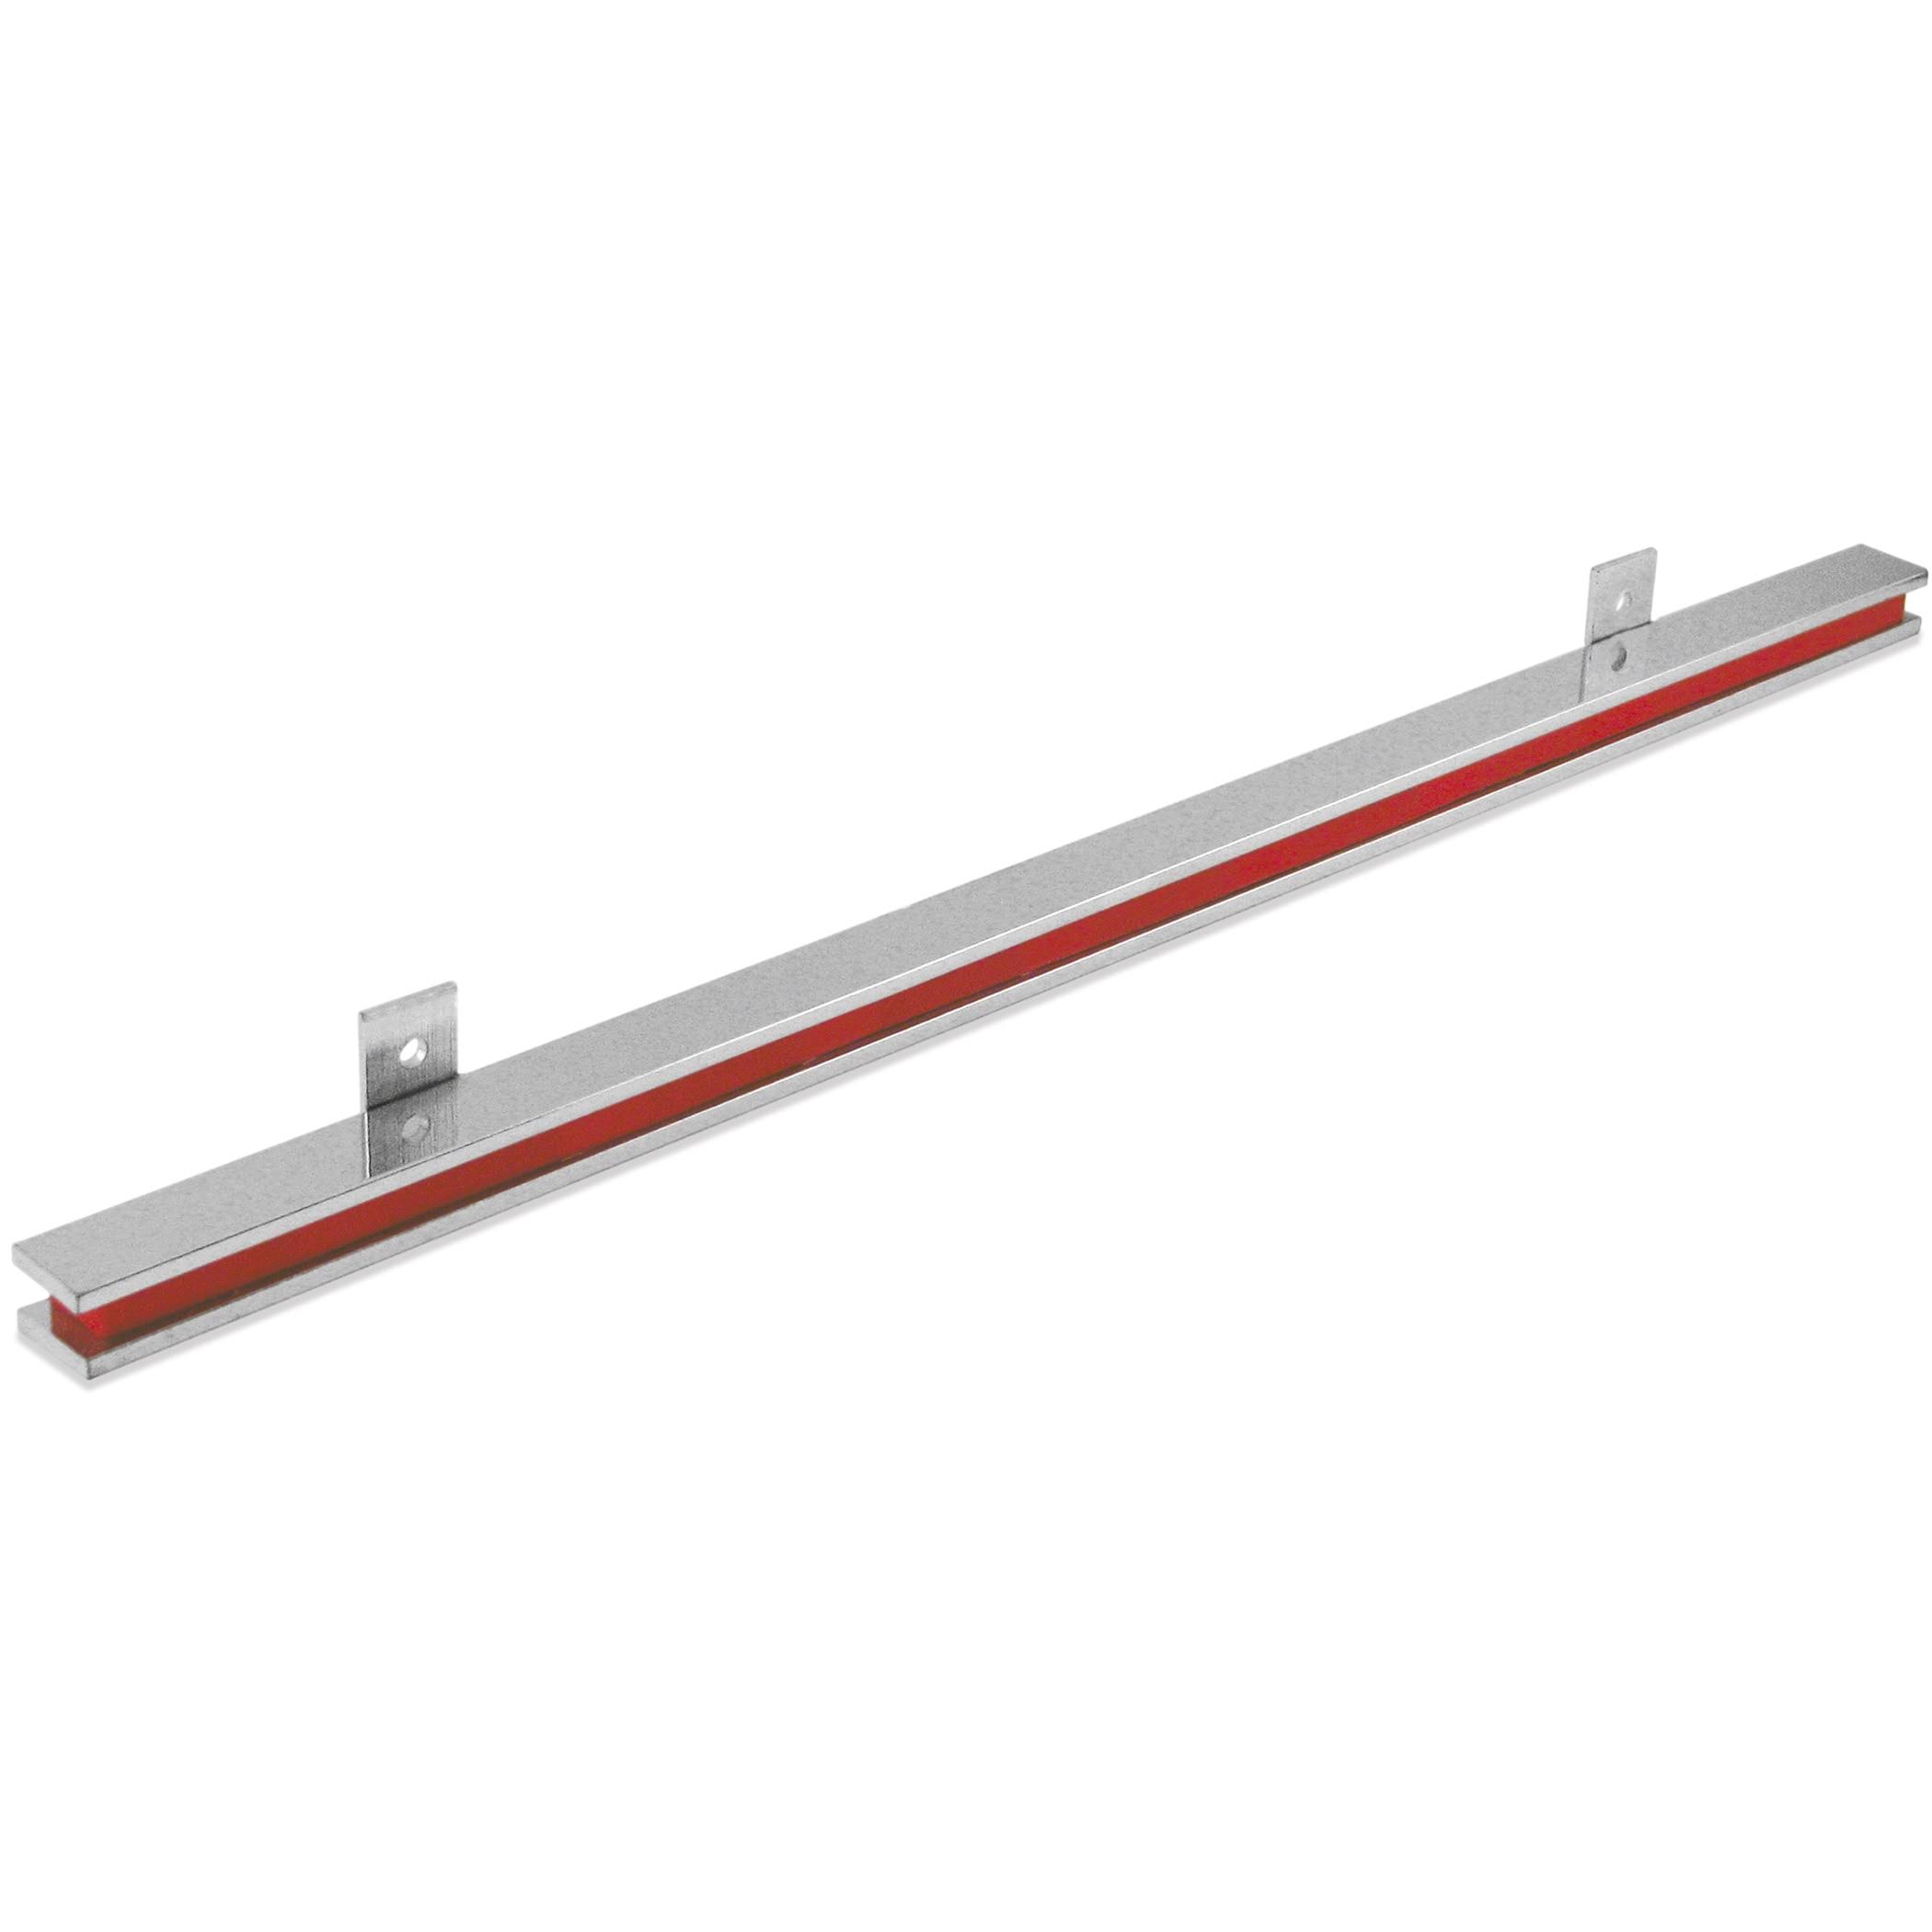 Master Magnetics 07662 Magnetic Tool Holder - Nickel with Red, 24"